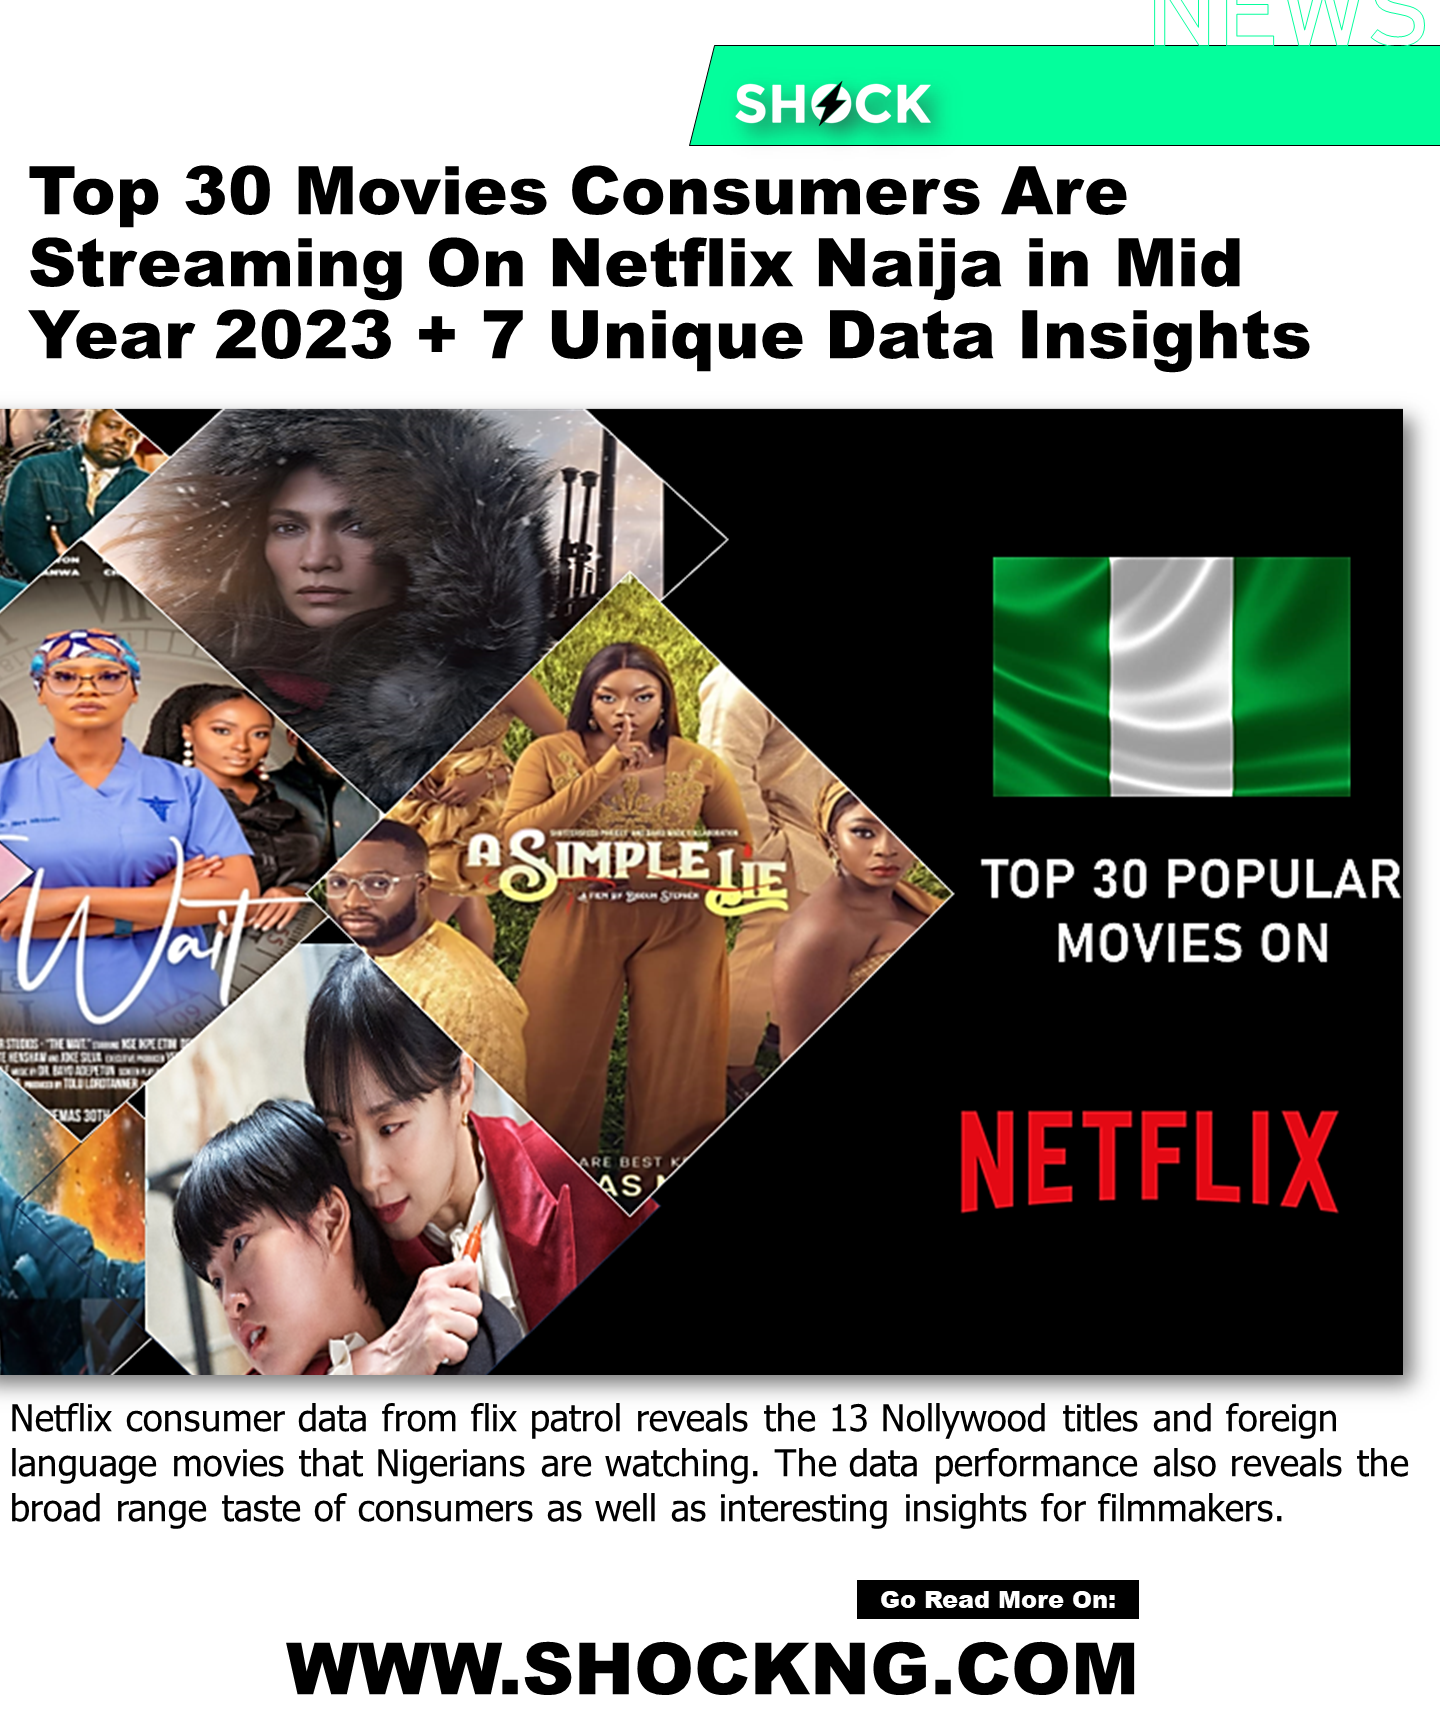 Top 30 Movies Consumers Are Streaming On Netflix Naija in 2023Mid Year Data - Top 30 Movies Consumers Are Streaming On Netflix Naija in 2023 (Mid Year Data)